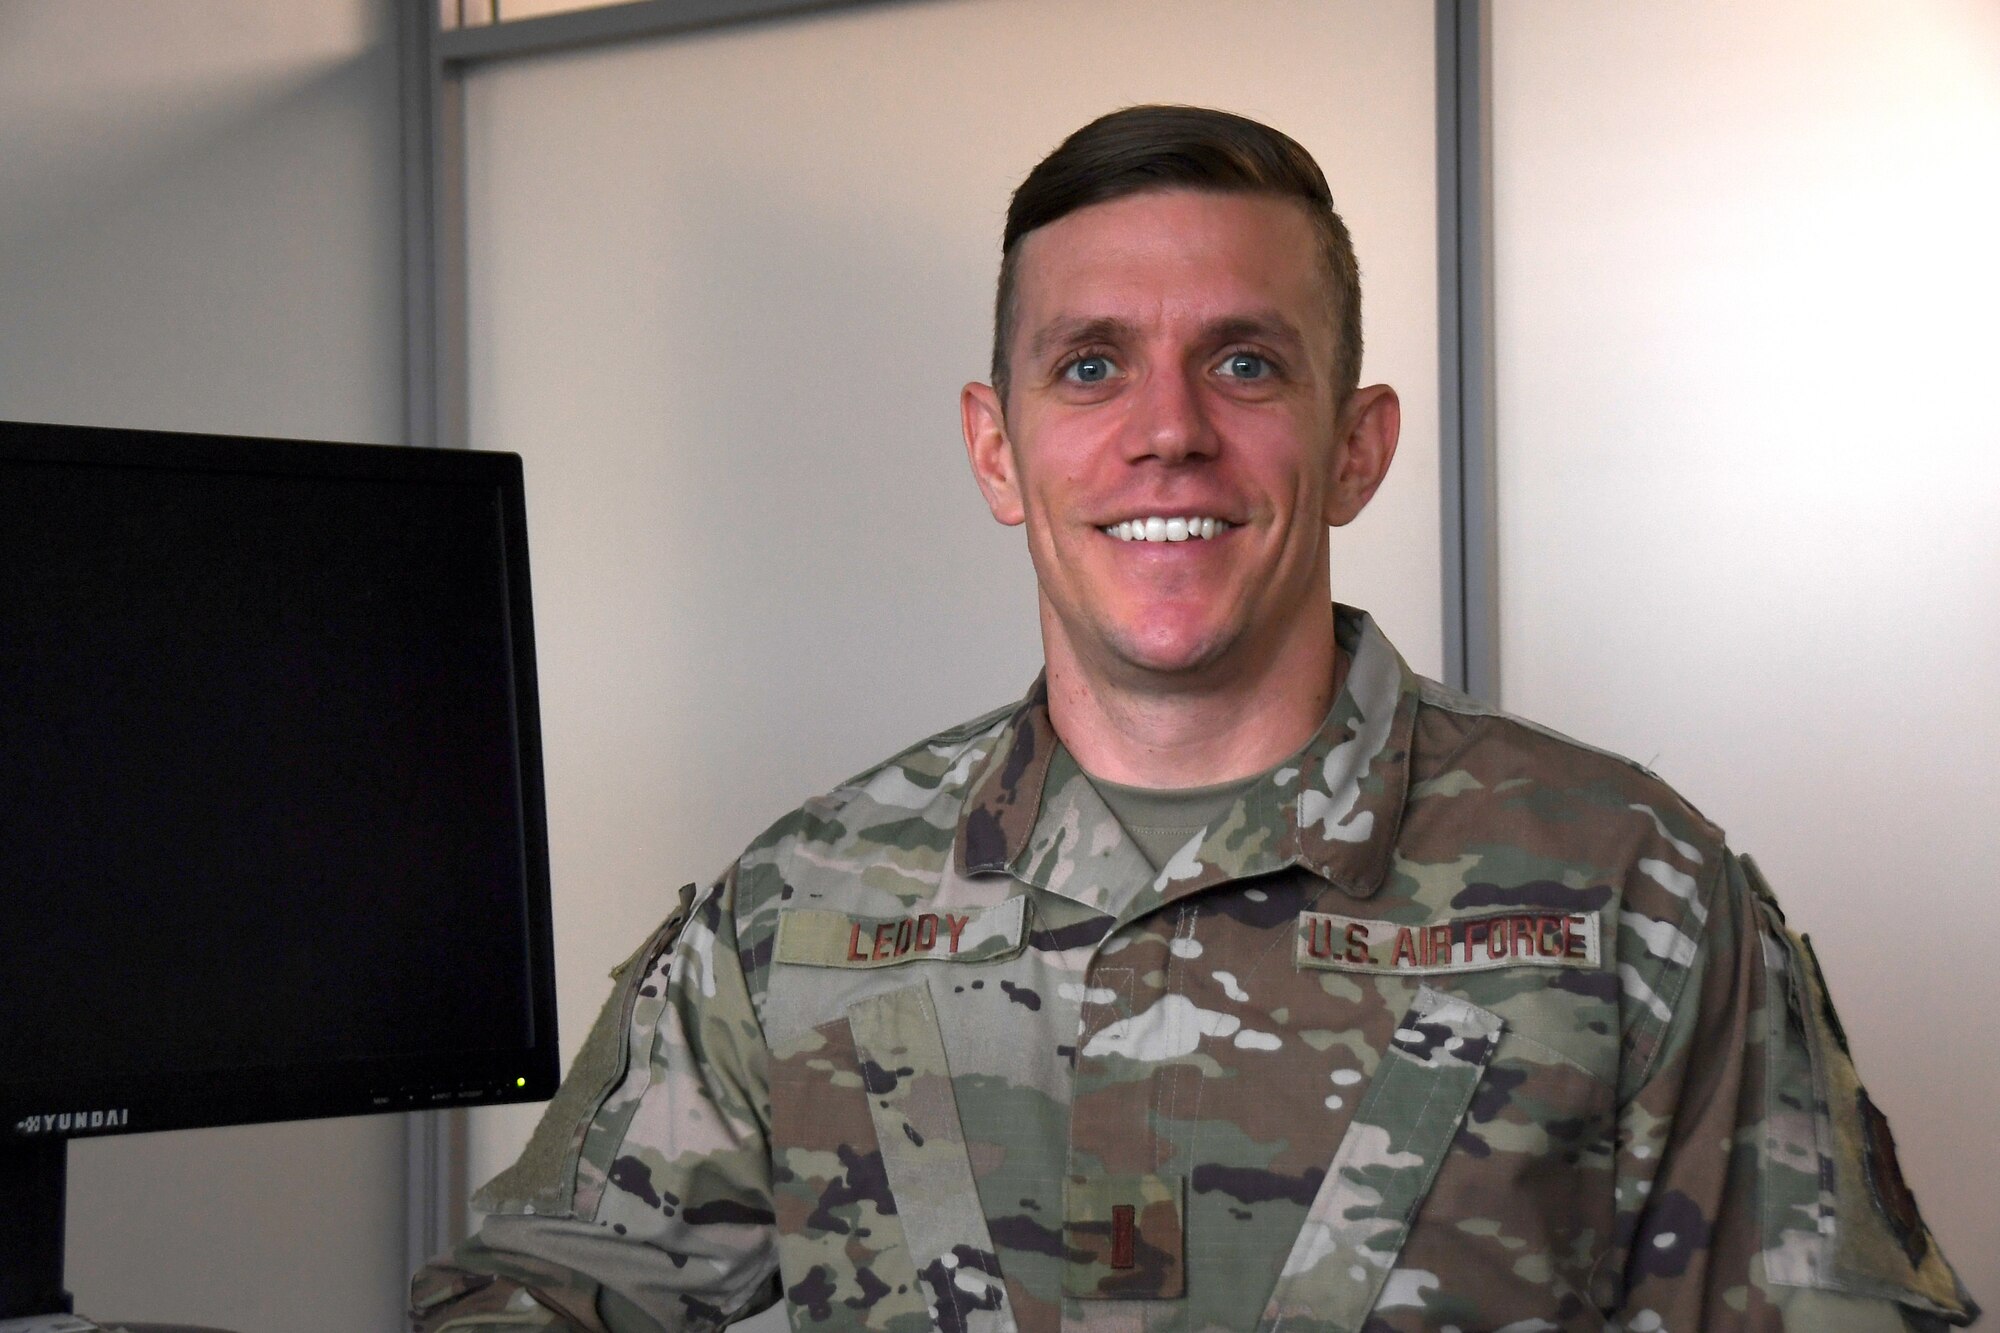 U.S. Air Force 2nd Lt. Zachary Leddy, 145th Airlift Wing Contracting officer, posed for a picture at his desk after discussing his involvement in the year end fiscal purchases with unexpected funding at the North Carolina Air National Guard (NCANG) Base, Charlotte Douglas International Airport, Oct. 4th, 2019. Members from the 145th Airlift Wing Contracting office, Finance, and Logistics Readiness Squadron collaborated across the wing to ensure end of year funds were appropriately spent on equipment needed for readiness for the 118th ASOS and 145th Airlift Wing. Members were able to purchase equipment for almost 1,500 members of the NCANG to ensure deployment readiness.